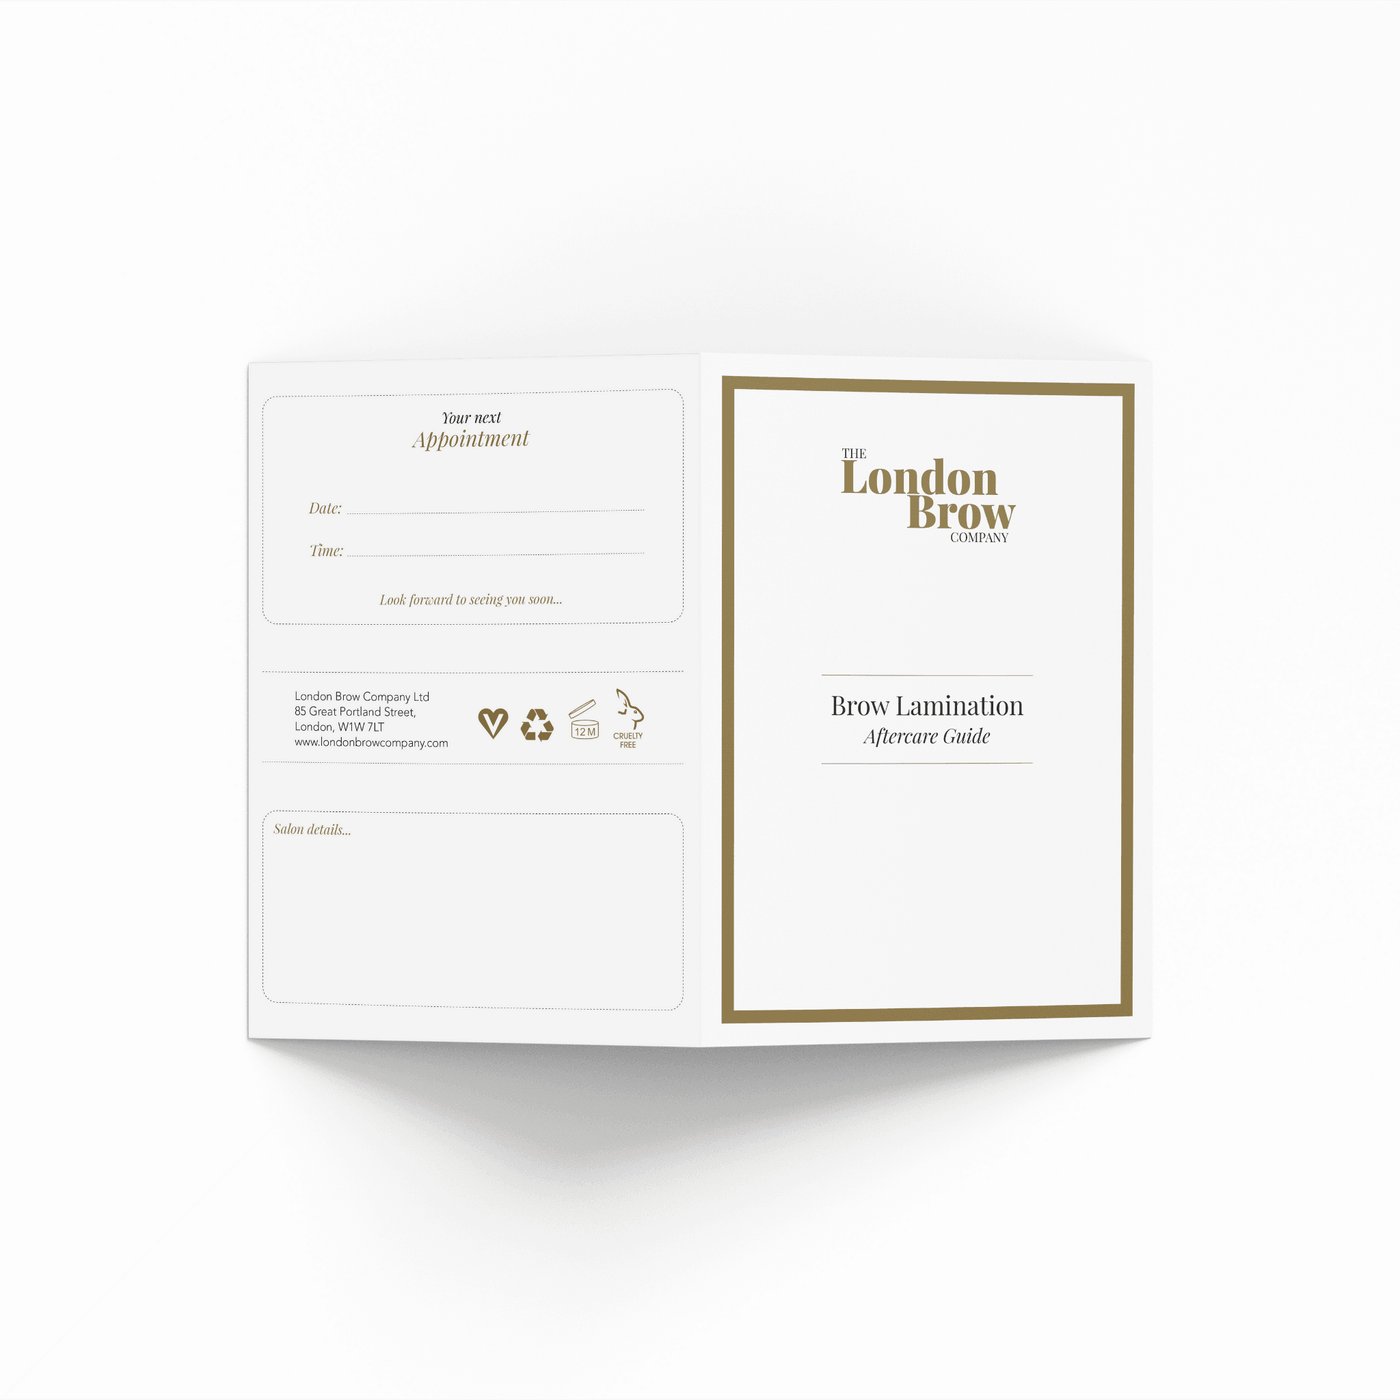 London Brow Lamination Aftercare Leaflets x 25 - The London Brow Company